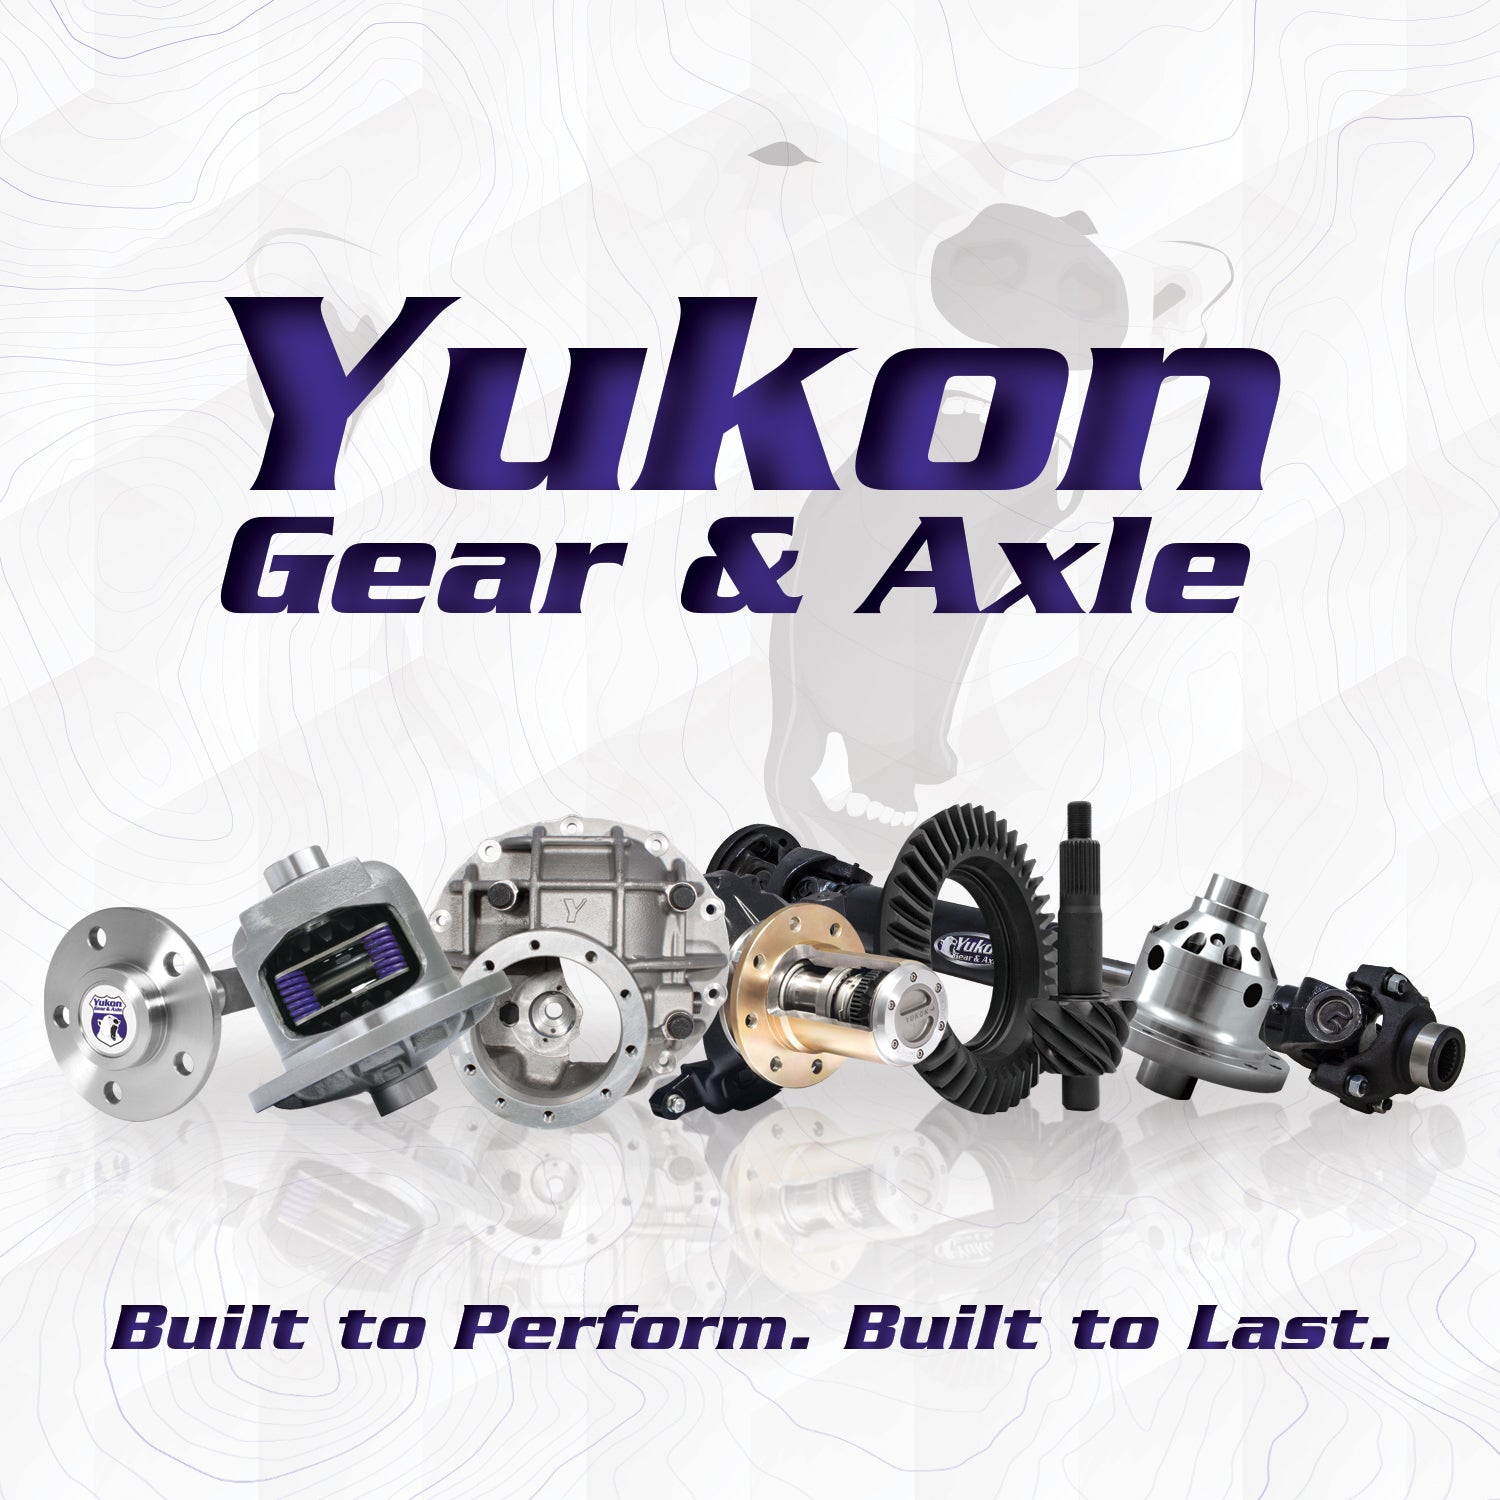 Yukon Gear Jeep (3.6 3.8) Differential Ring and Pinion Kit YGK056STG2